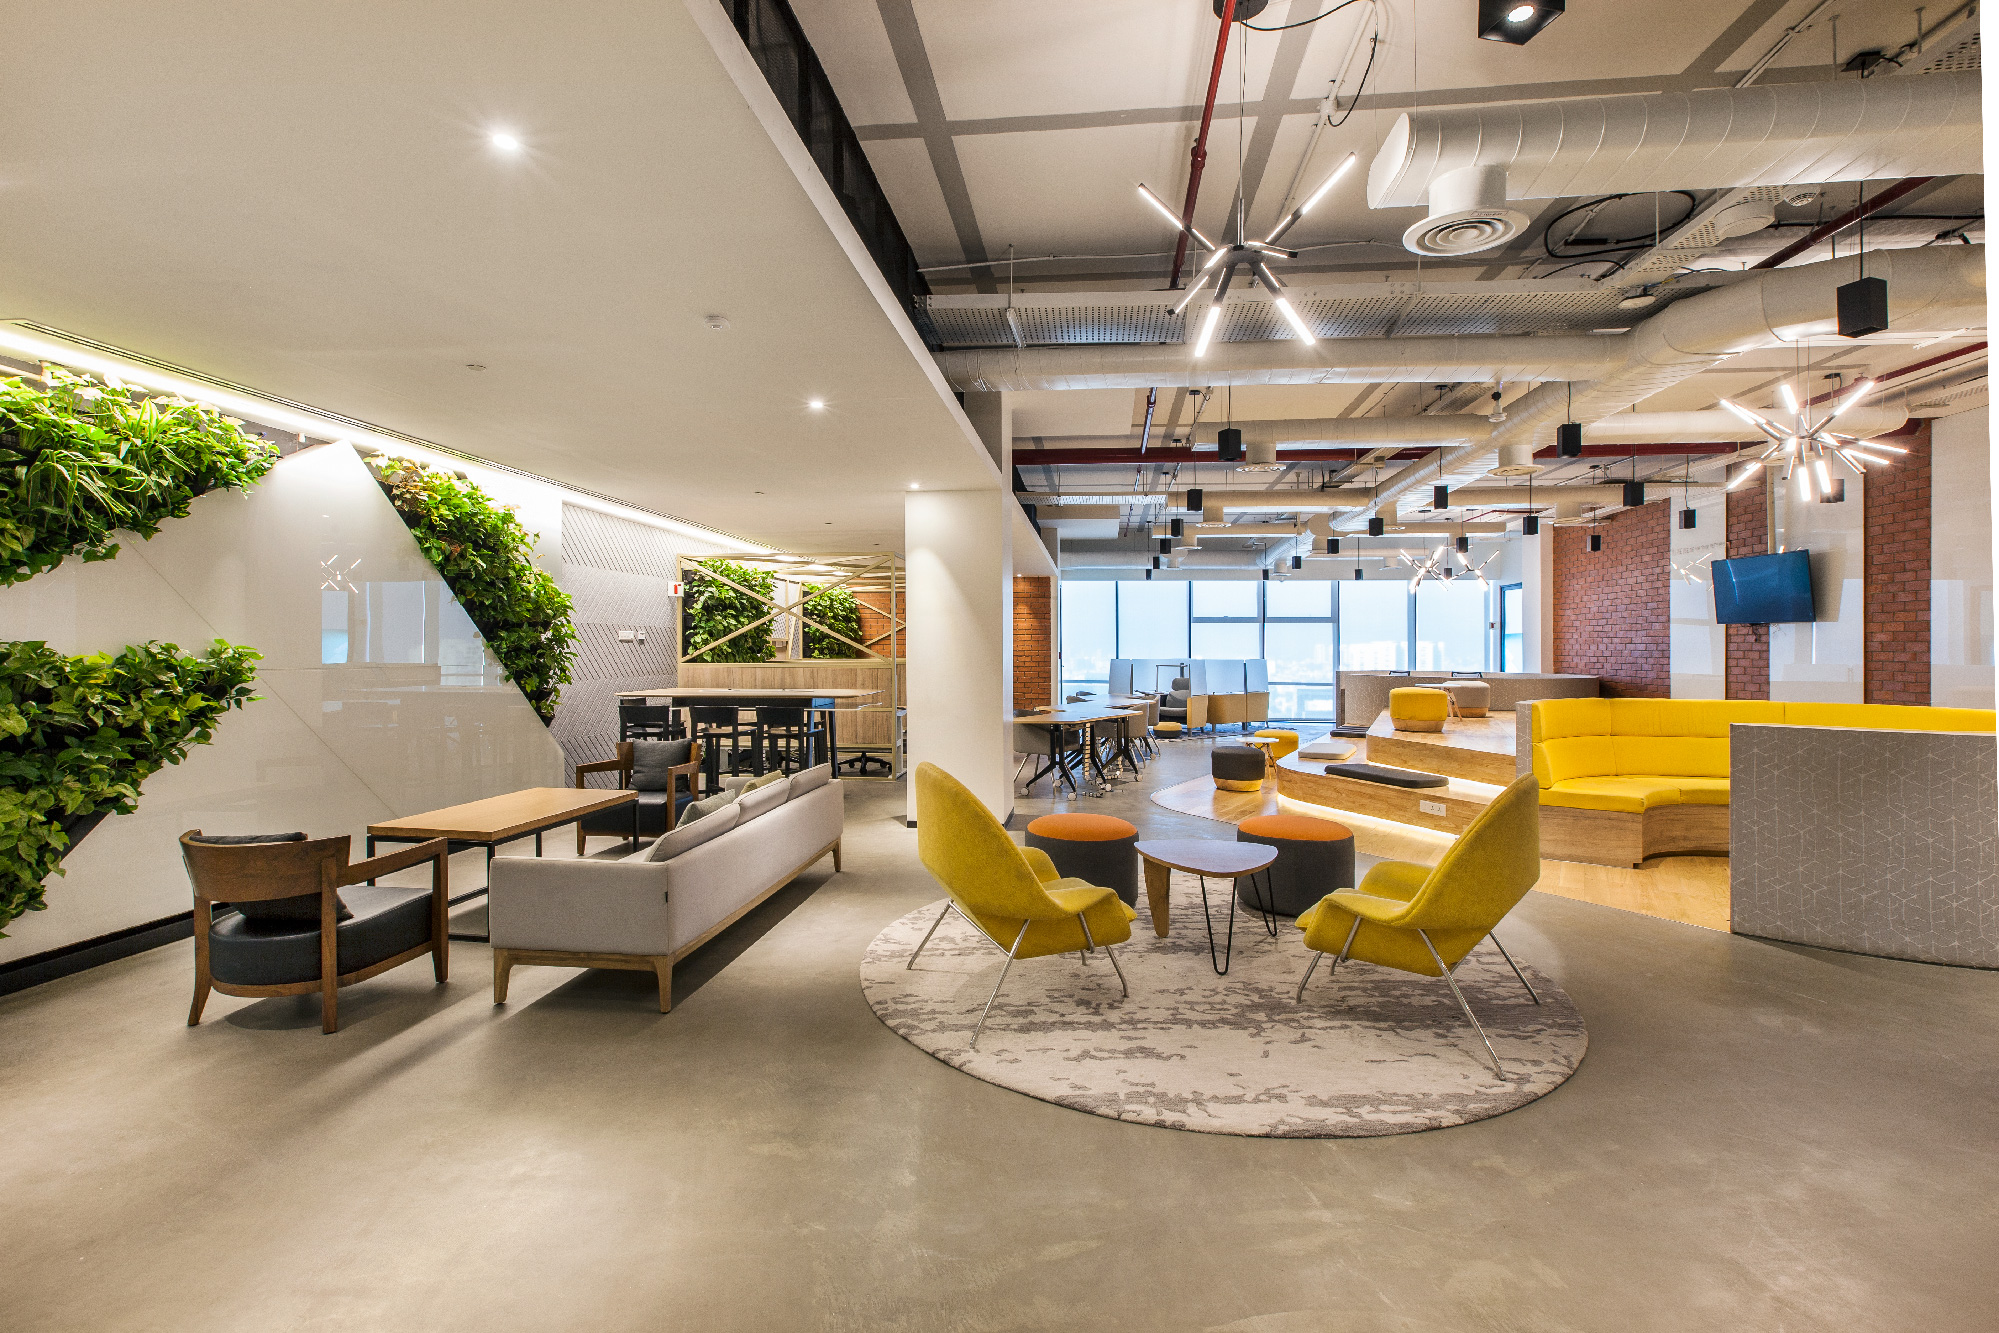  inclusivity in workplace designs: Northern Trust office